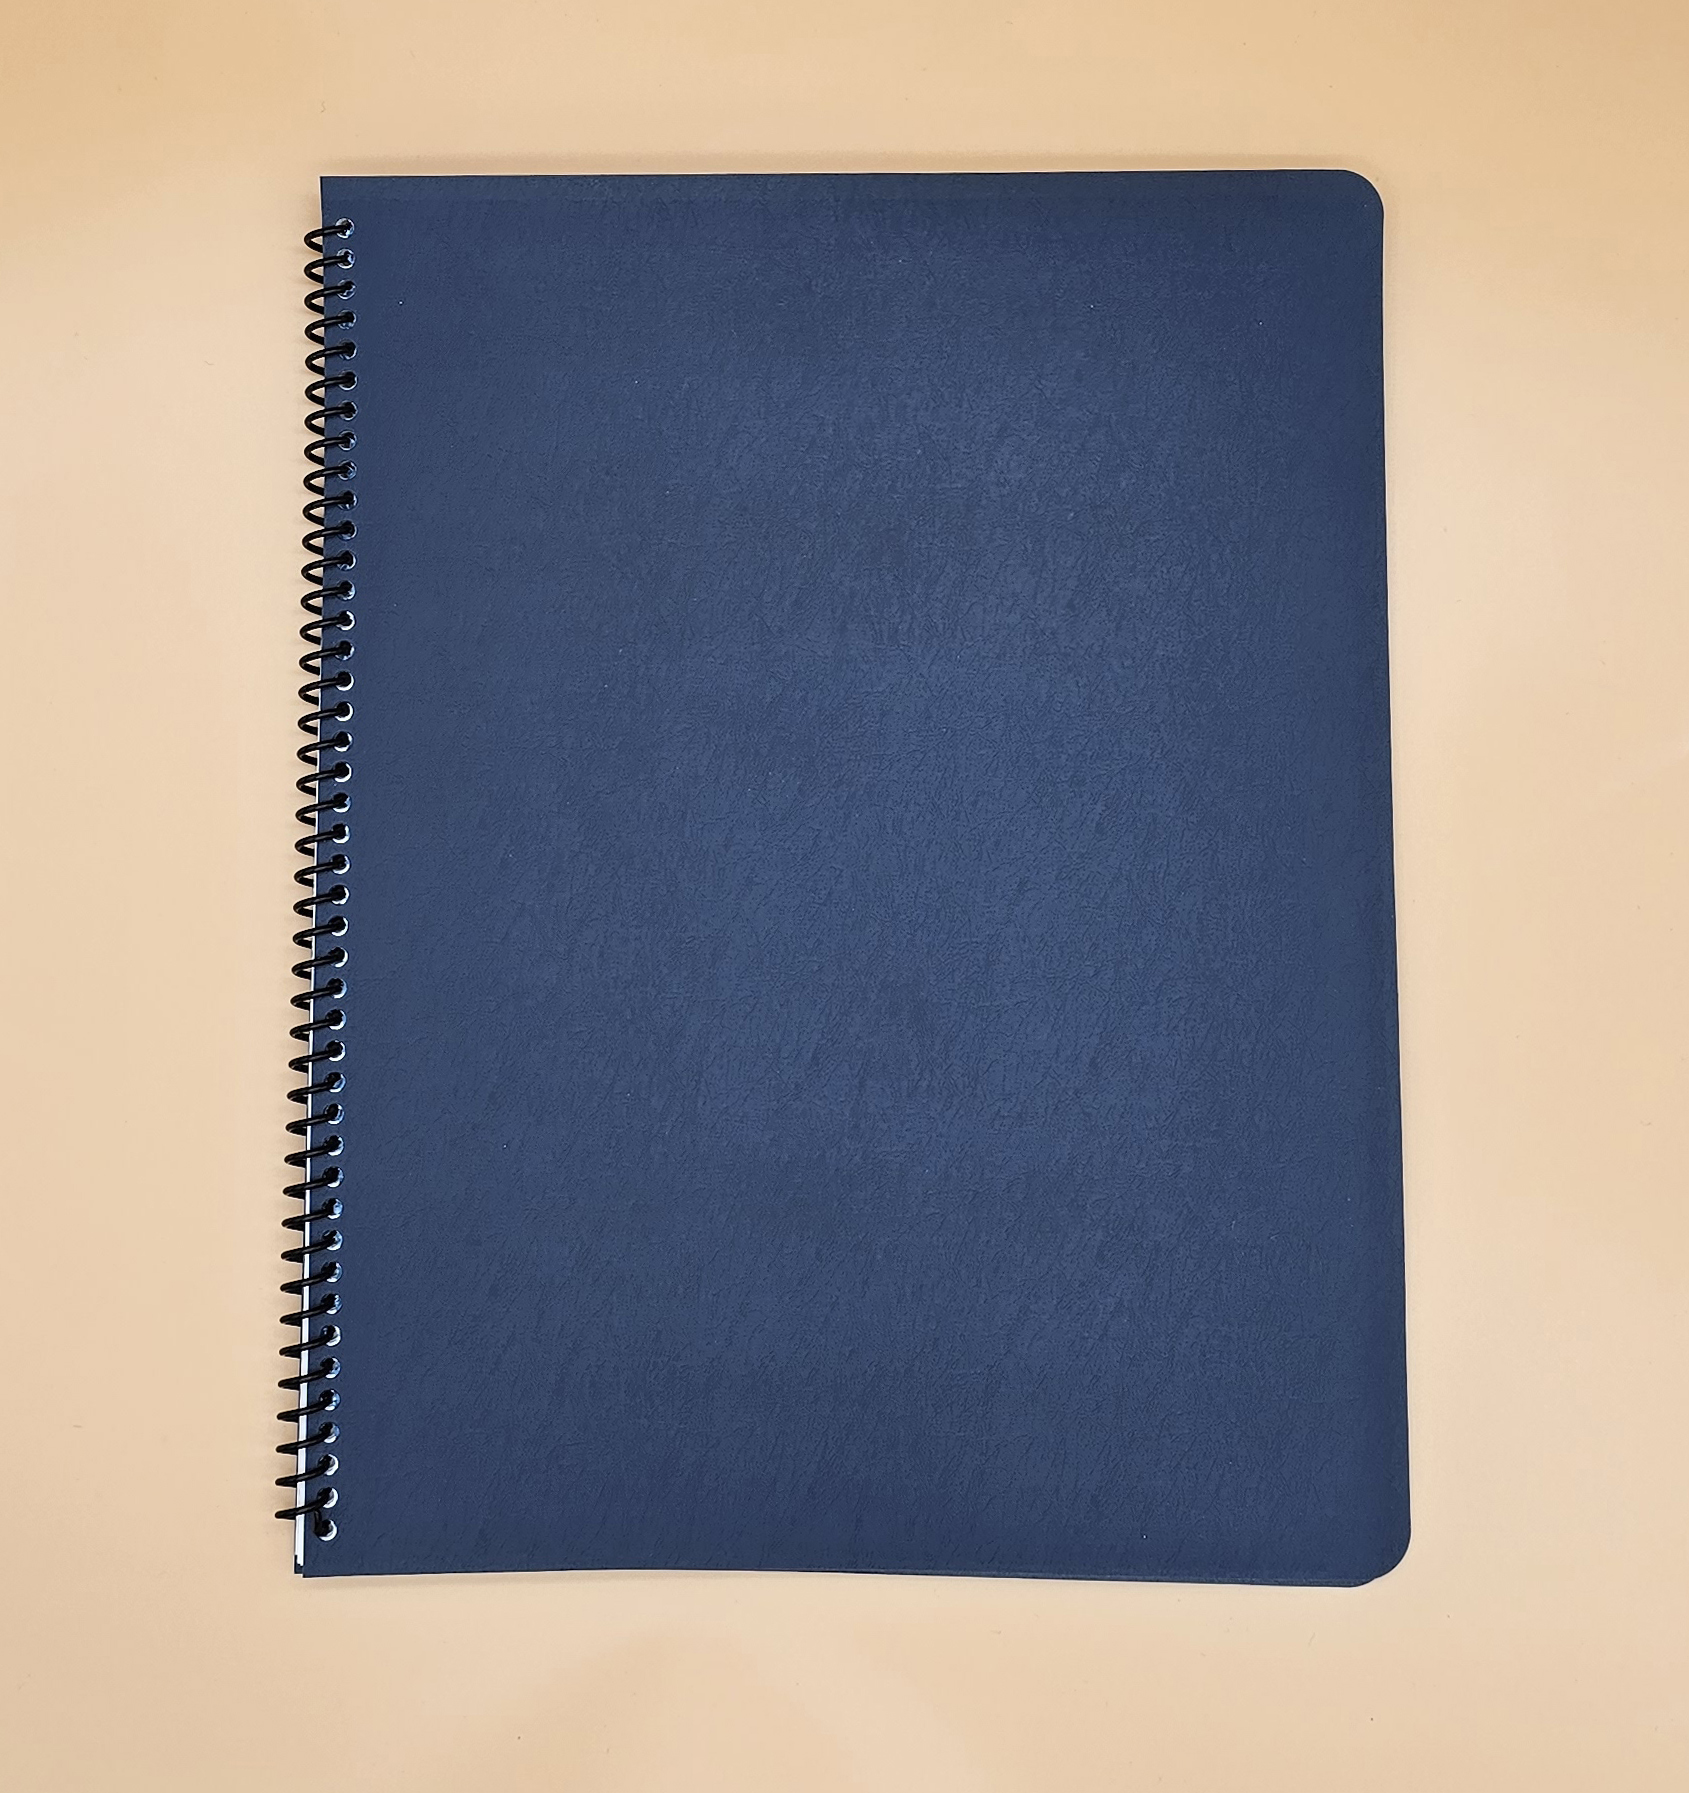 Durable Faux-Leather Grain Vinyl Cover Endures Daily Use.